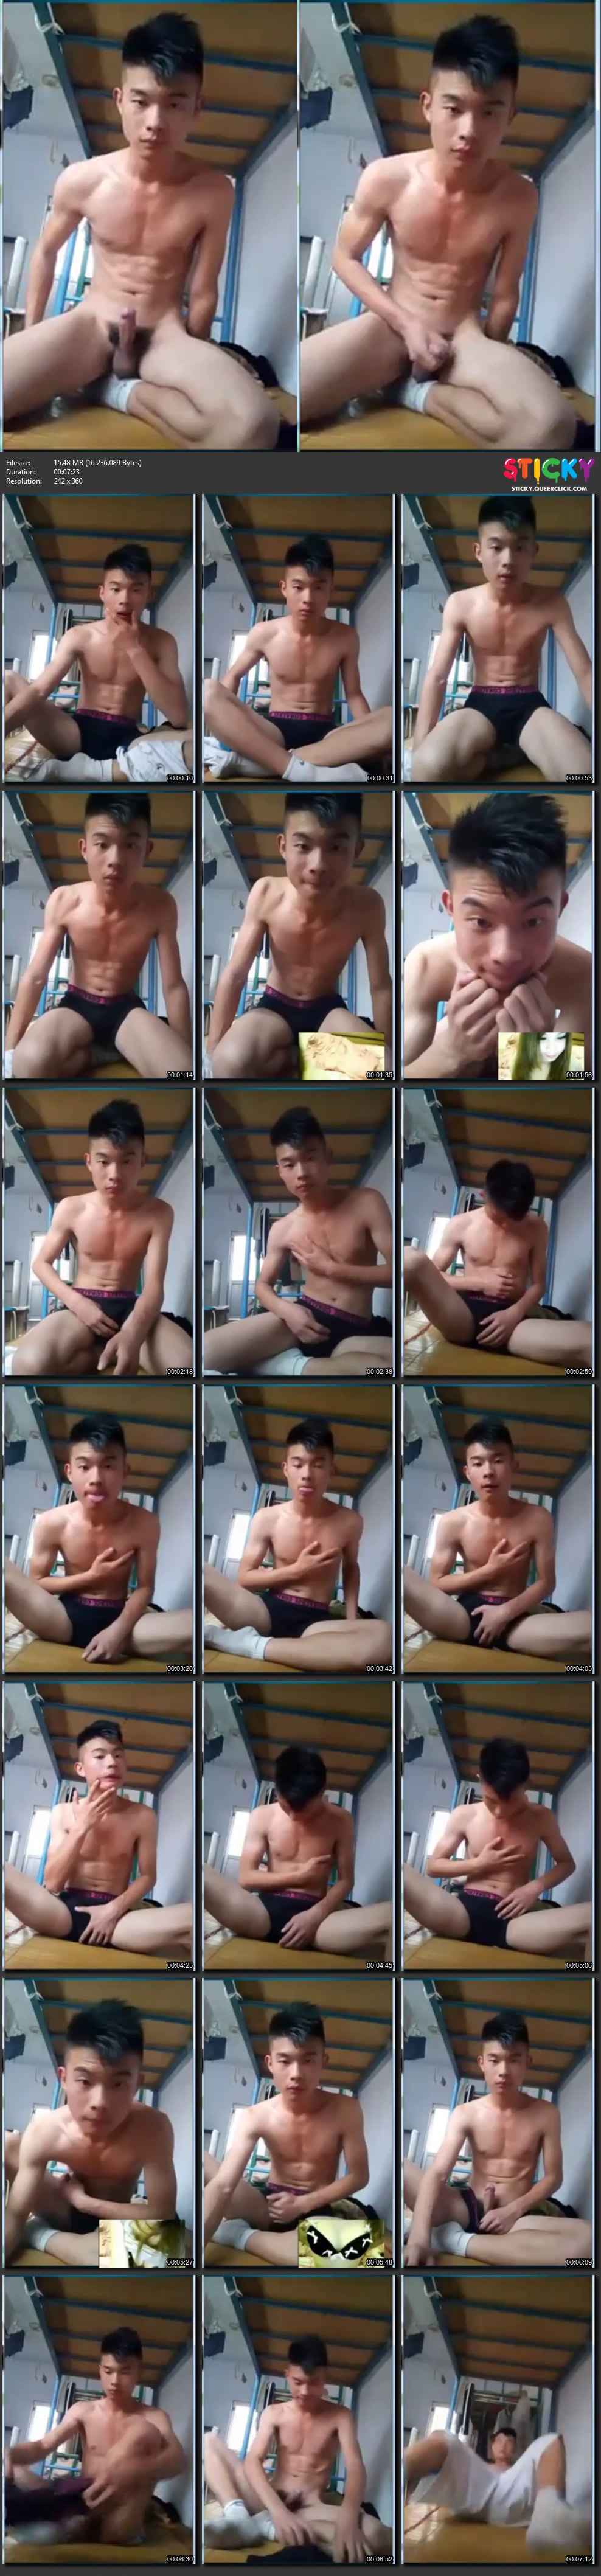 straight-chinese-eye-candy-strips-on-cam.jpg